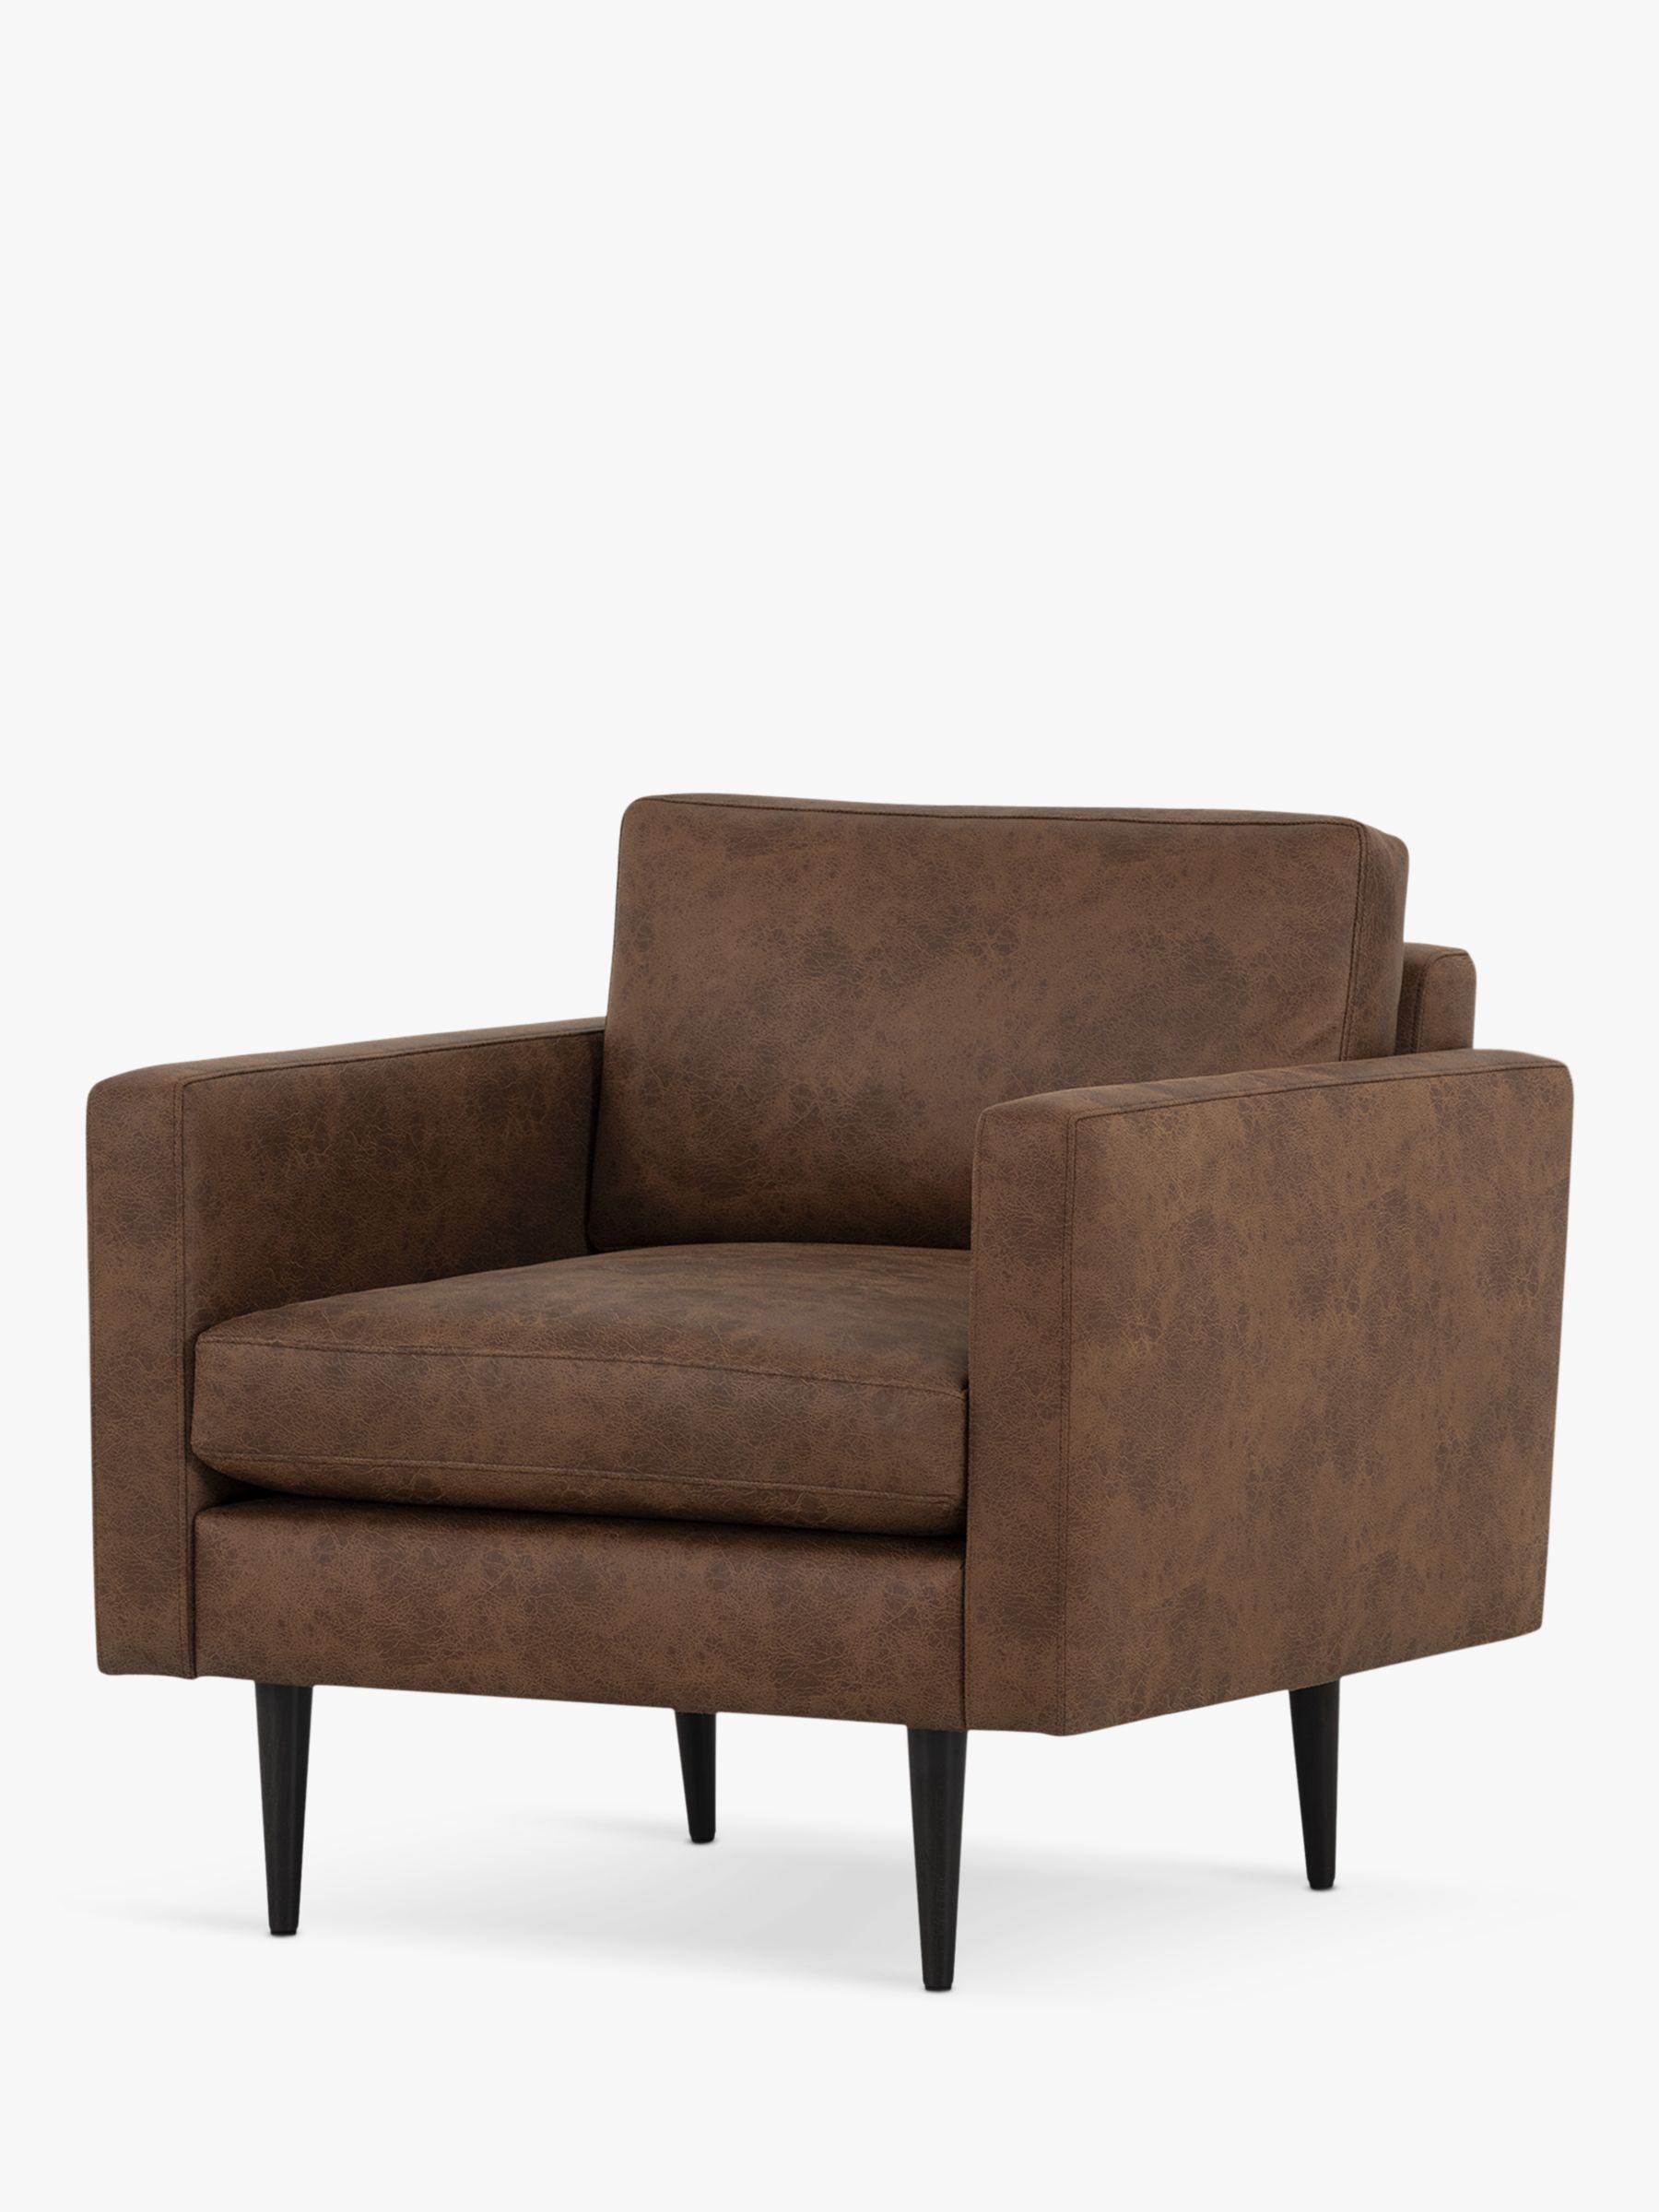 Photo of Swyft model 01 faux leather armchair chestnut